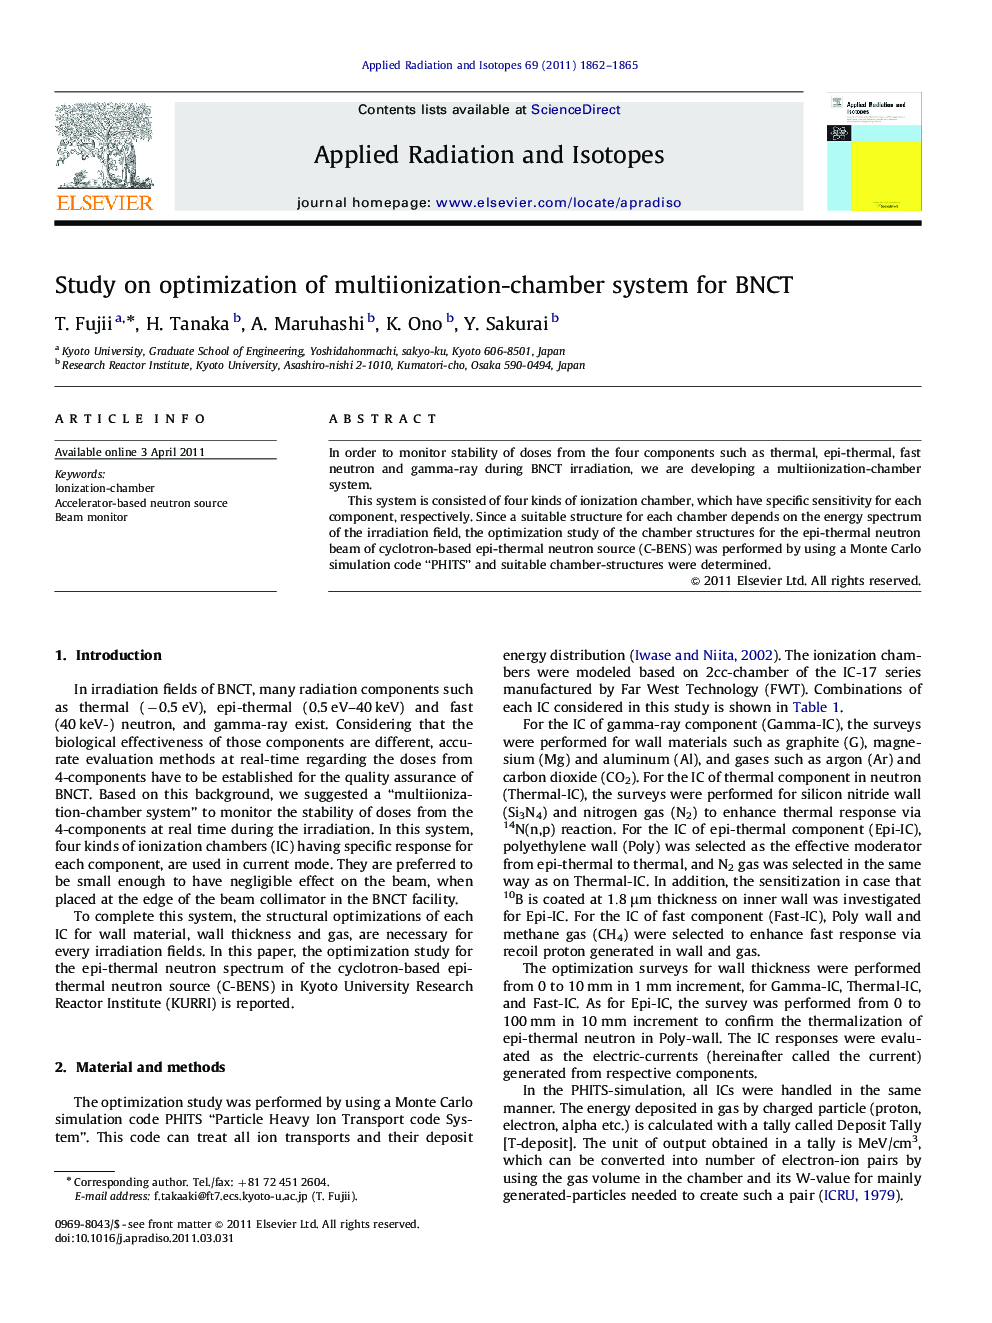 Study on optimization of multiionization-chamber system for BNCT